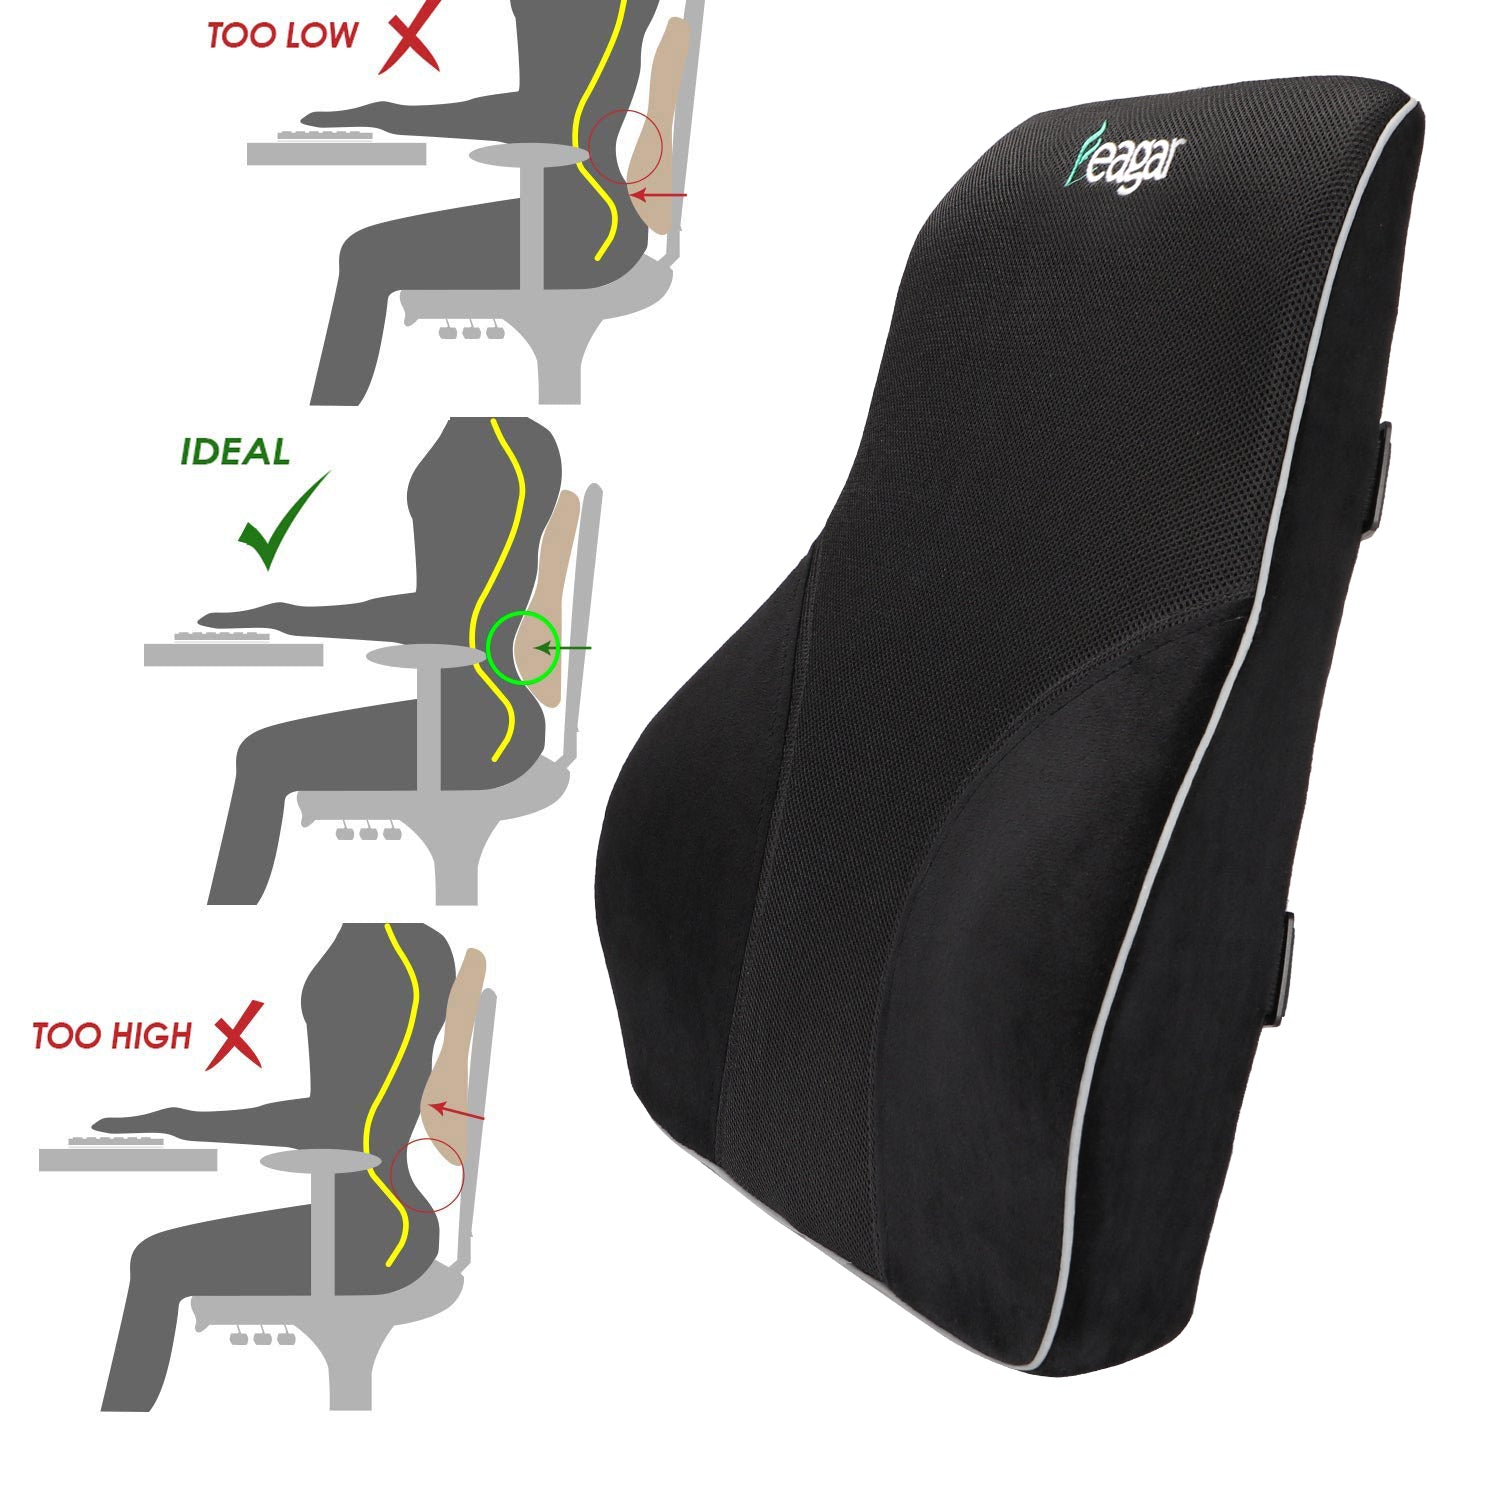 BackShield Lumbar Support Ergonomically Designed for Car Seat, Home Office  Chair, Lumbar Back Support Cushion for Car, Truck or RV Featuring S-Curve